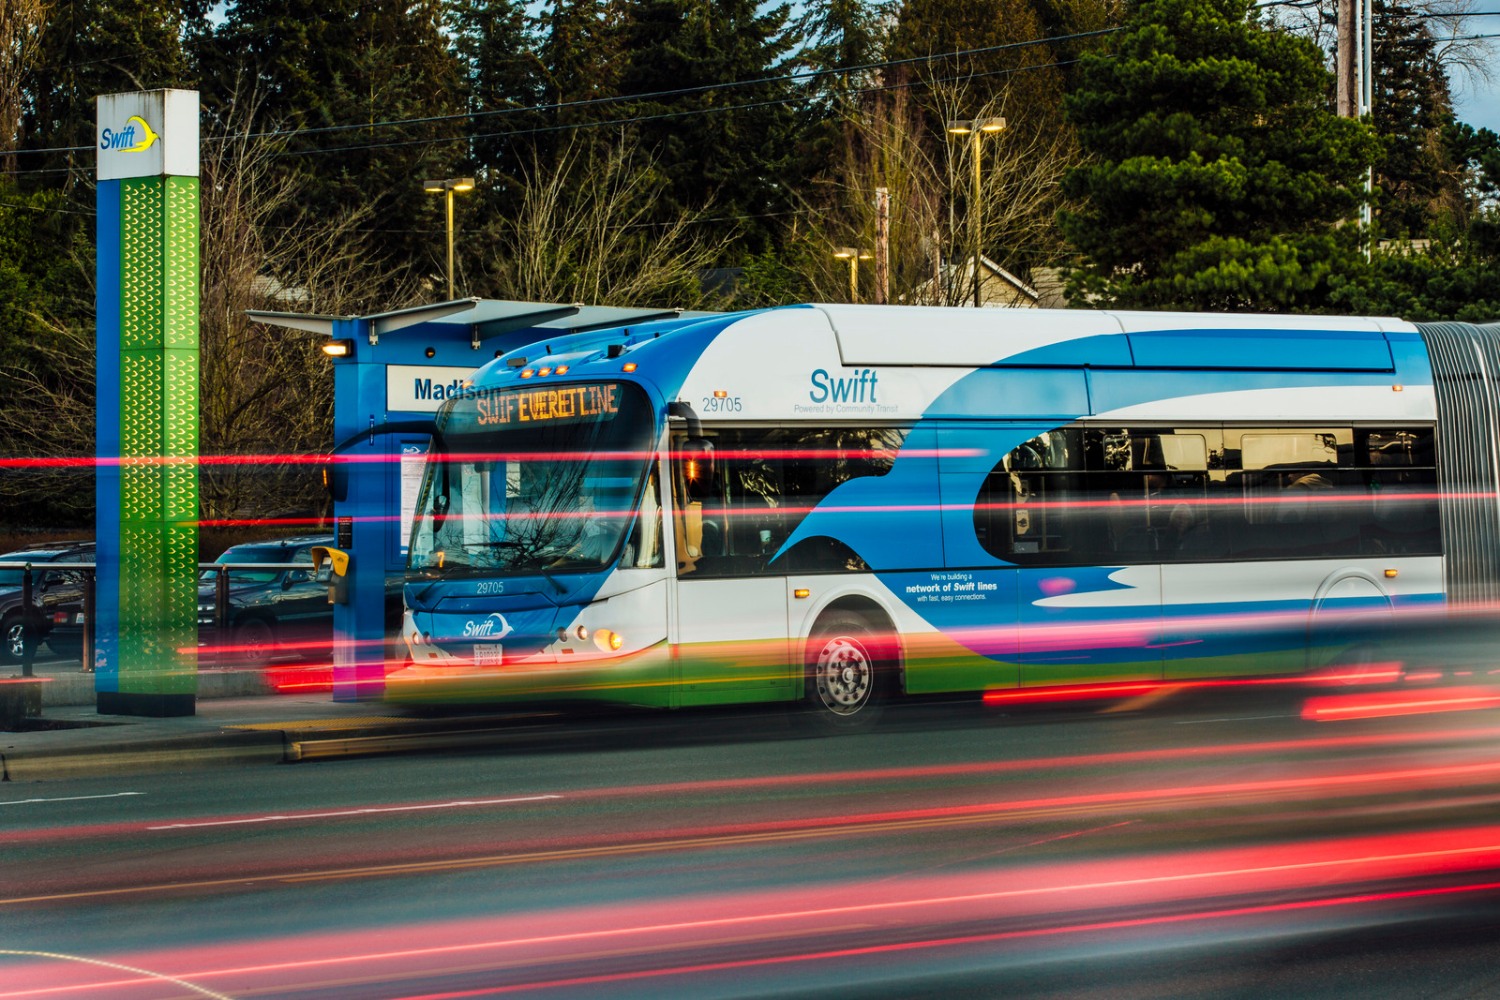 A photo of a Swift bus in Everett, shown with laser-like lighting effects